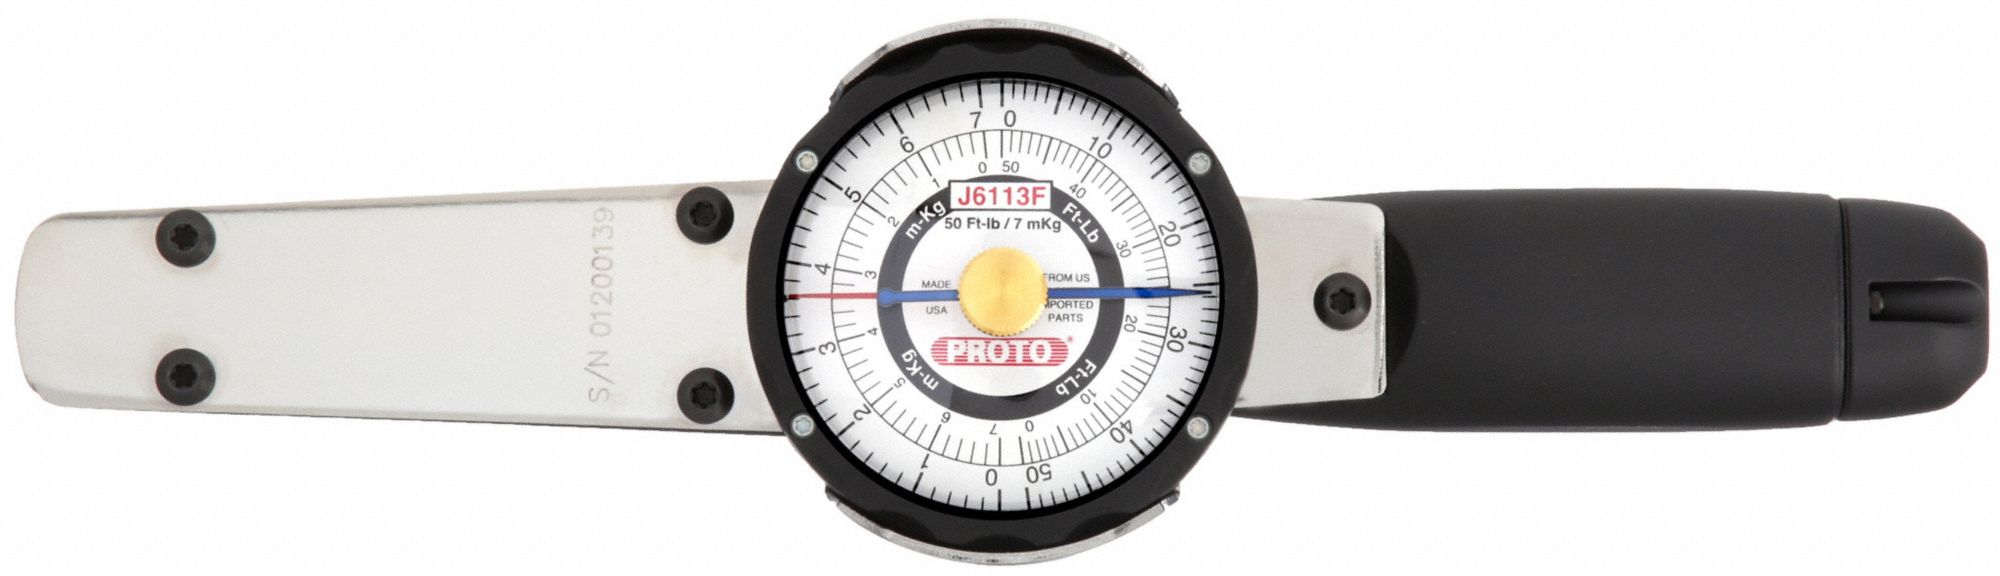 PROTO, 1/4 in Drive Size, 6 to 30 in-lb/7 cm-kg to 35 cm-kg, Dial